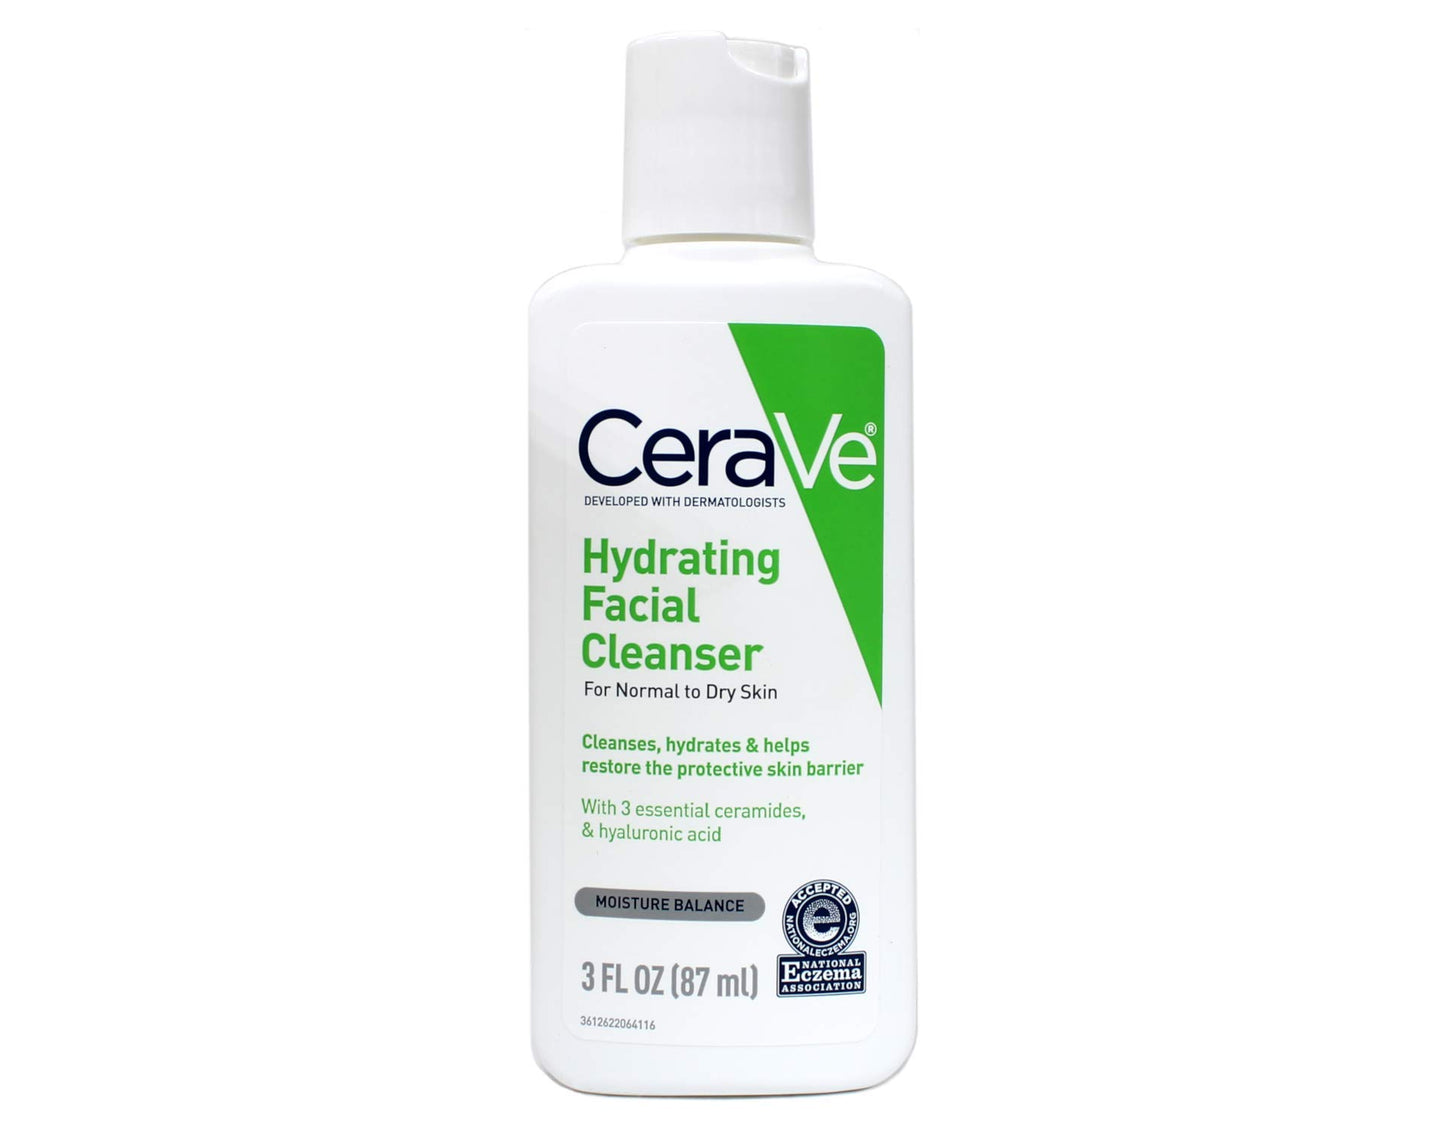 Hydrating Facial Cleanser for Normal to Dry Skin